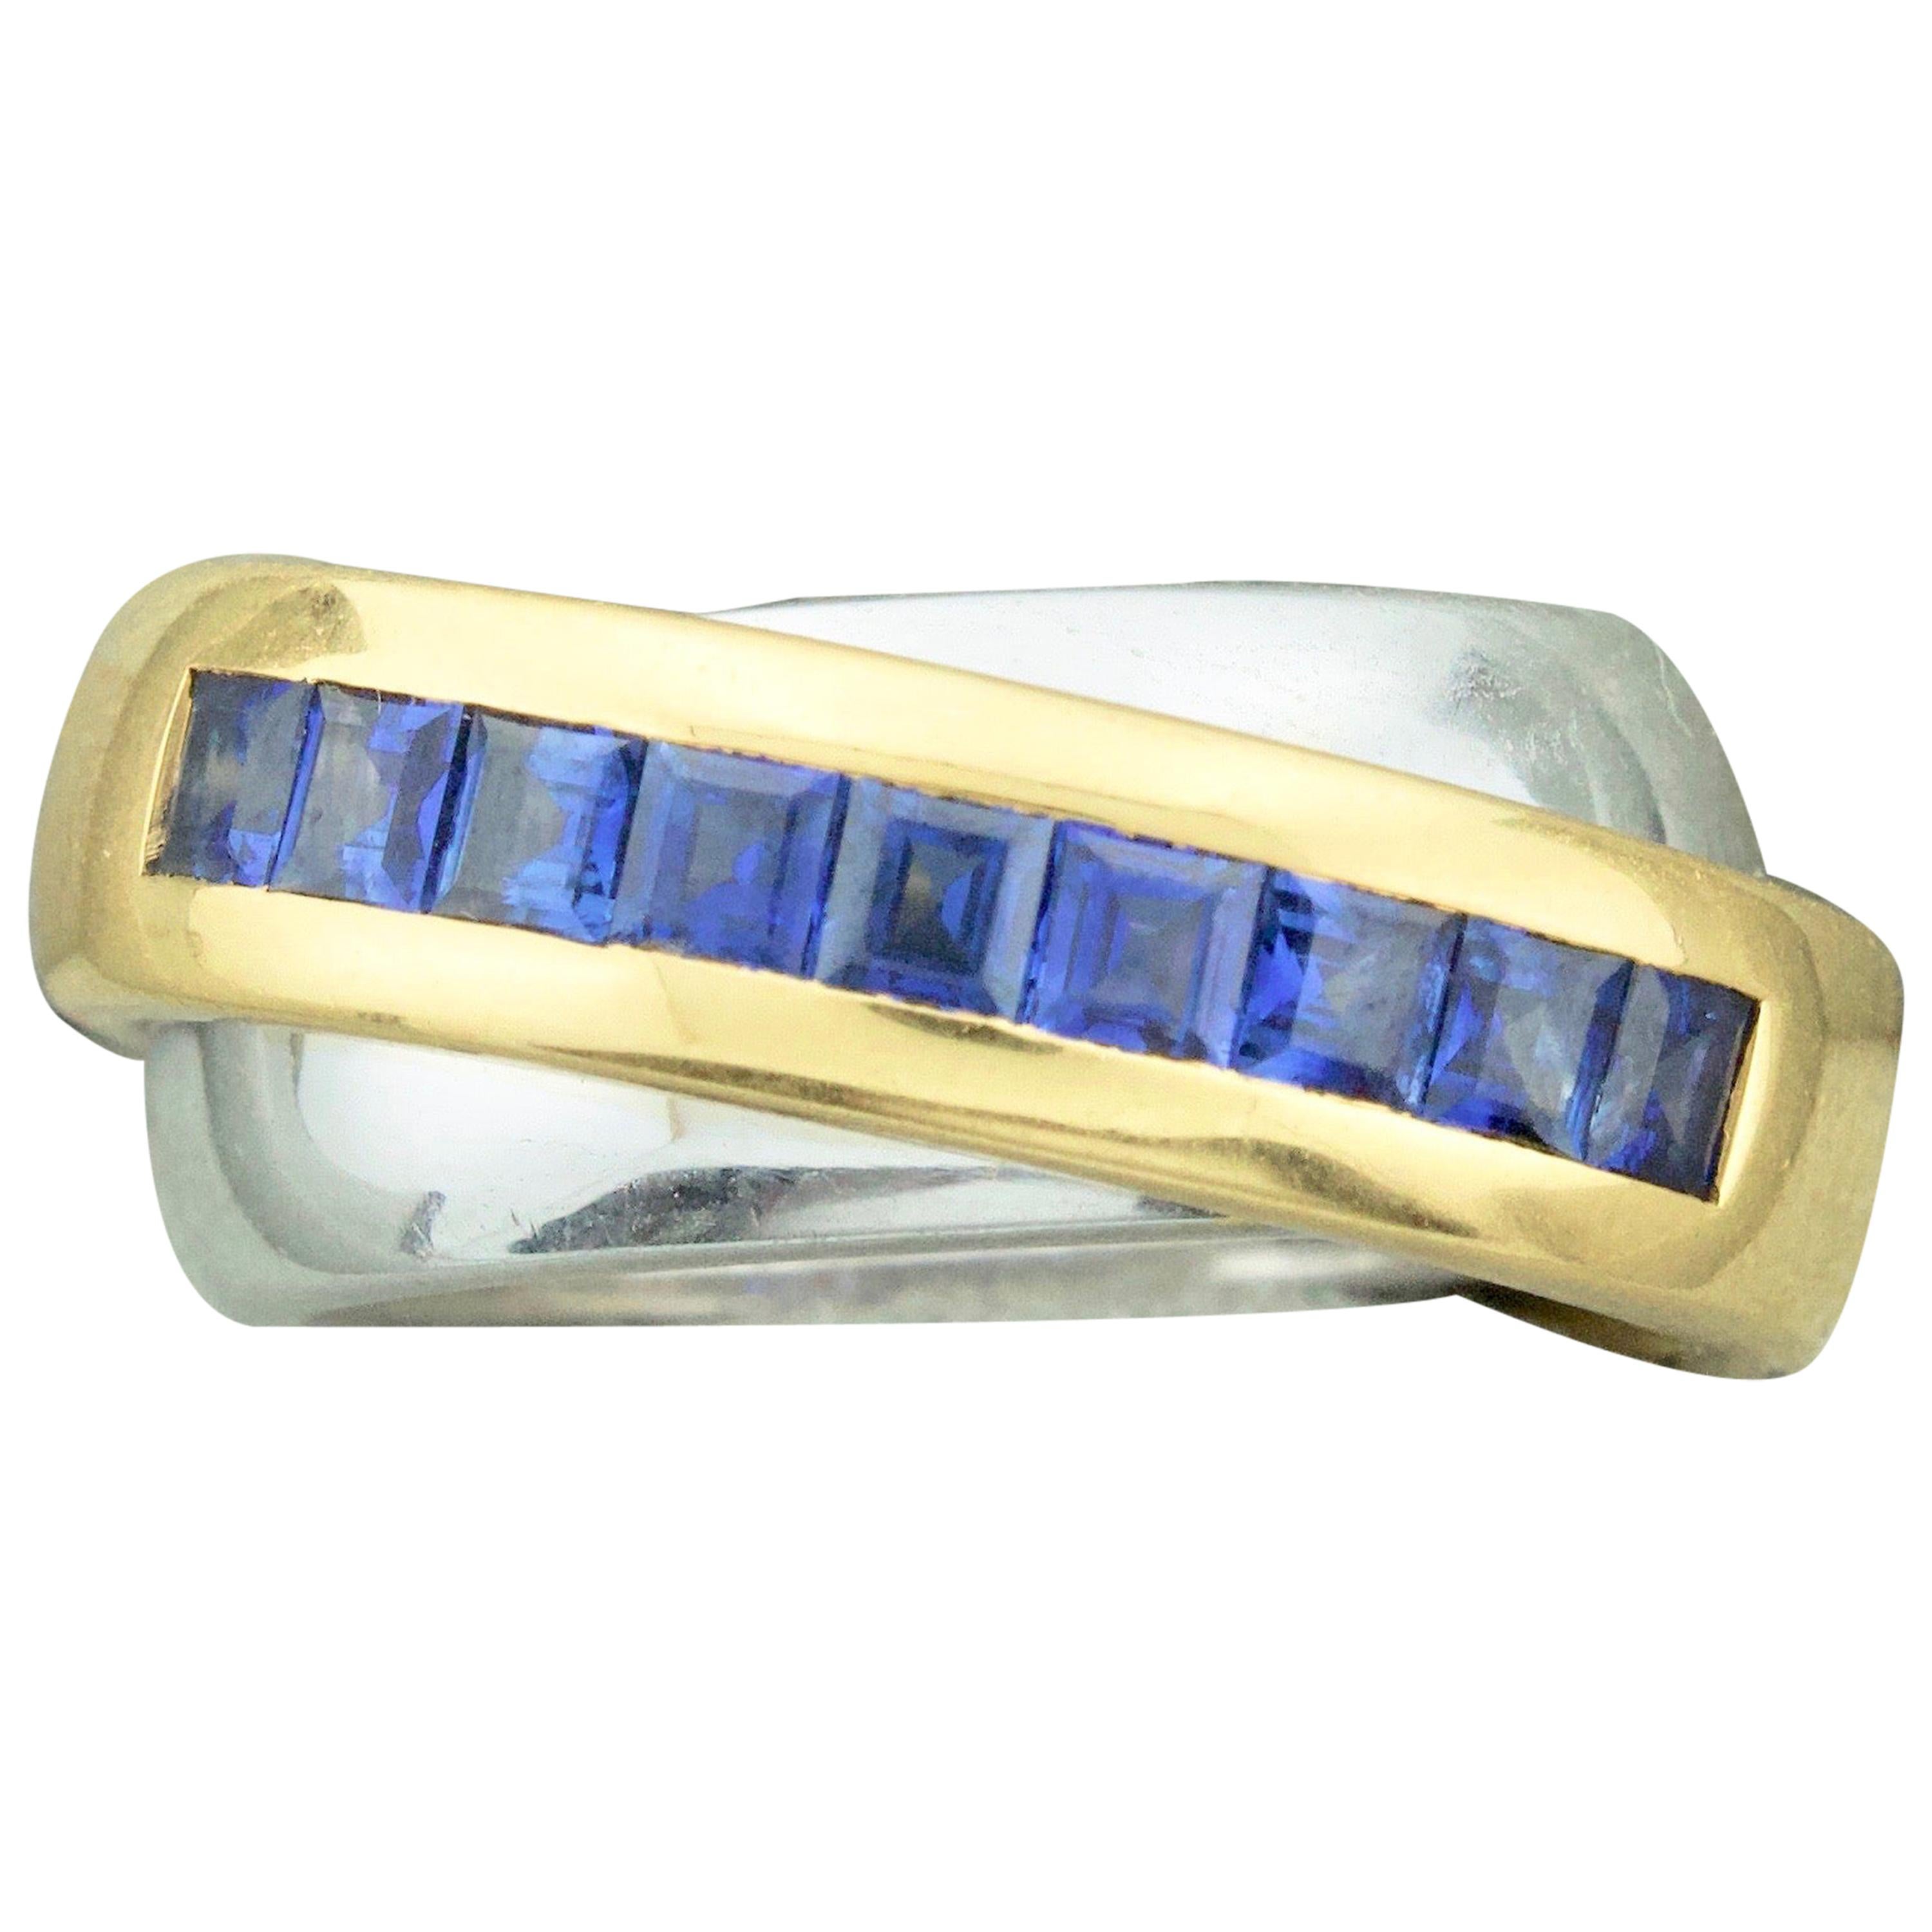 1991 Cartier Sapphire Band Ring in 18 Karat Yellow and White Gold